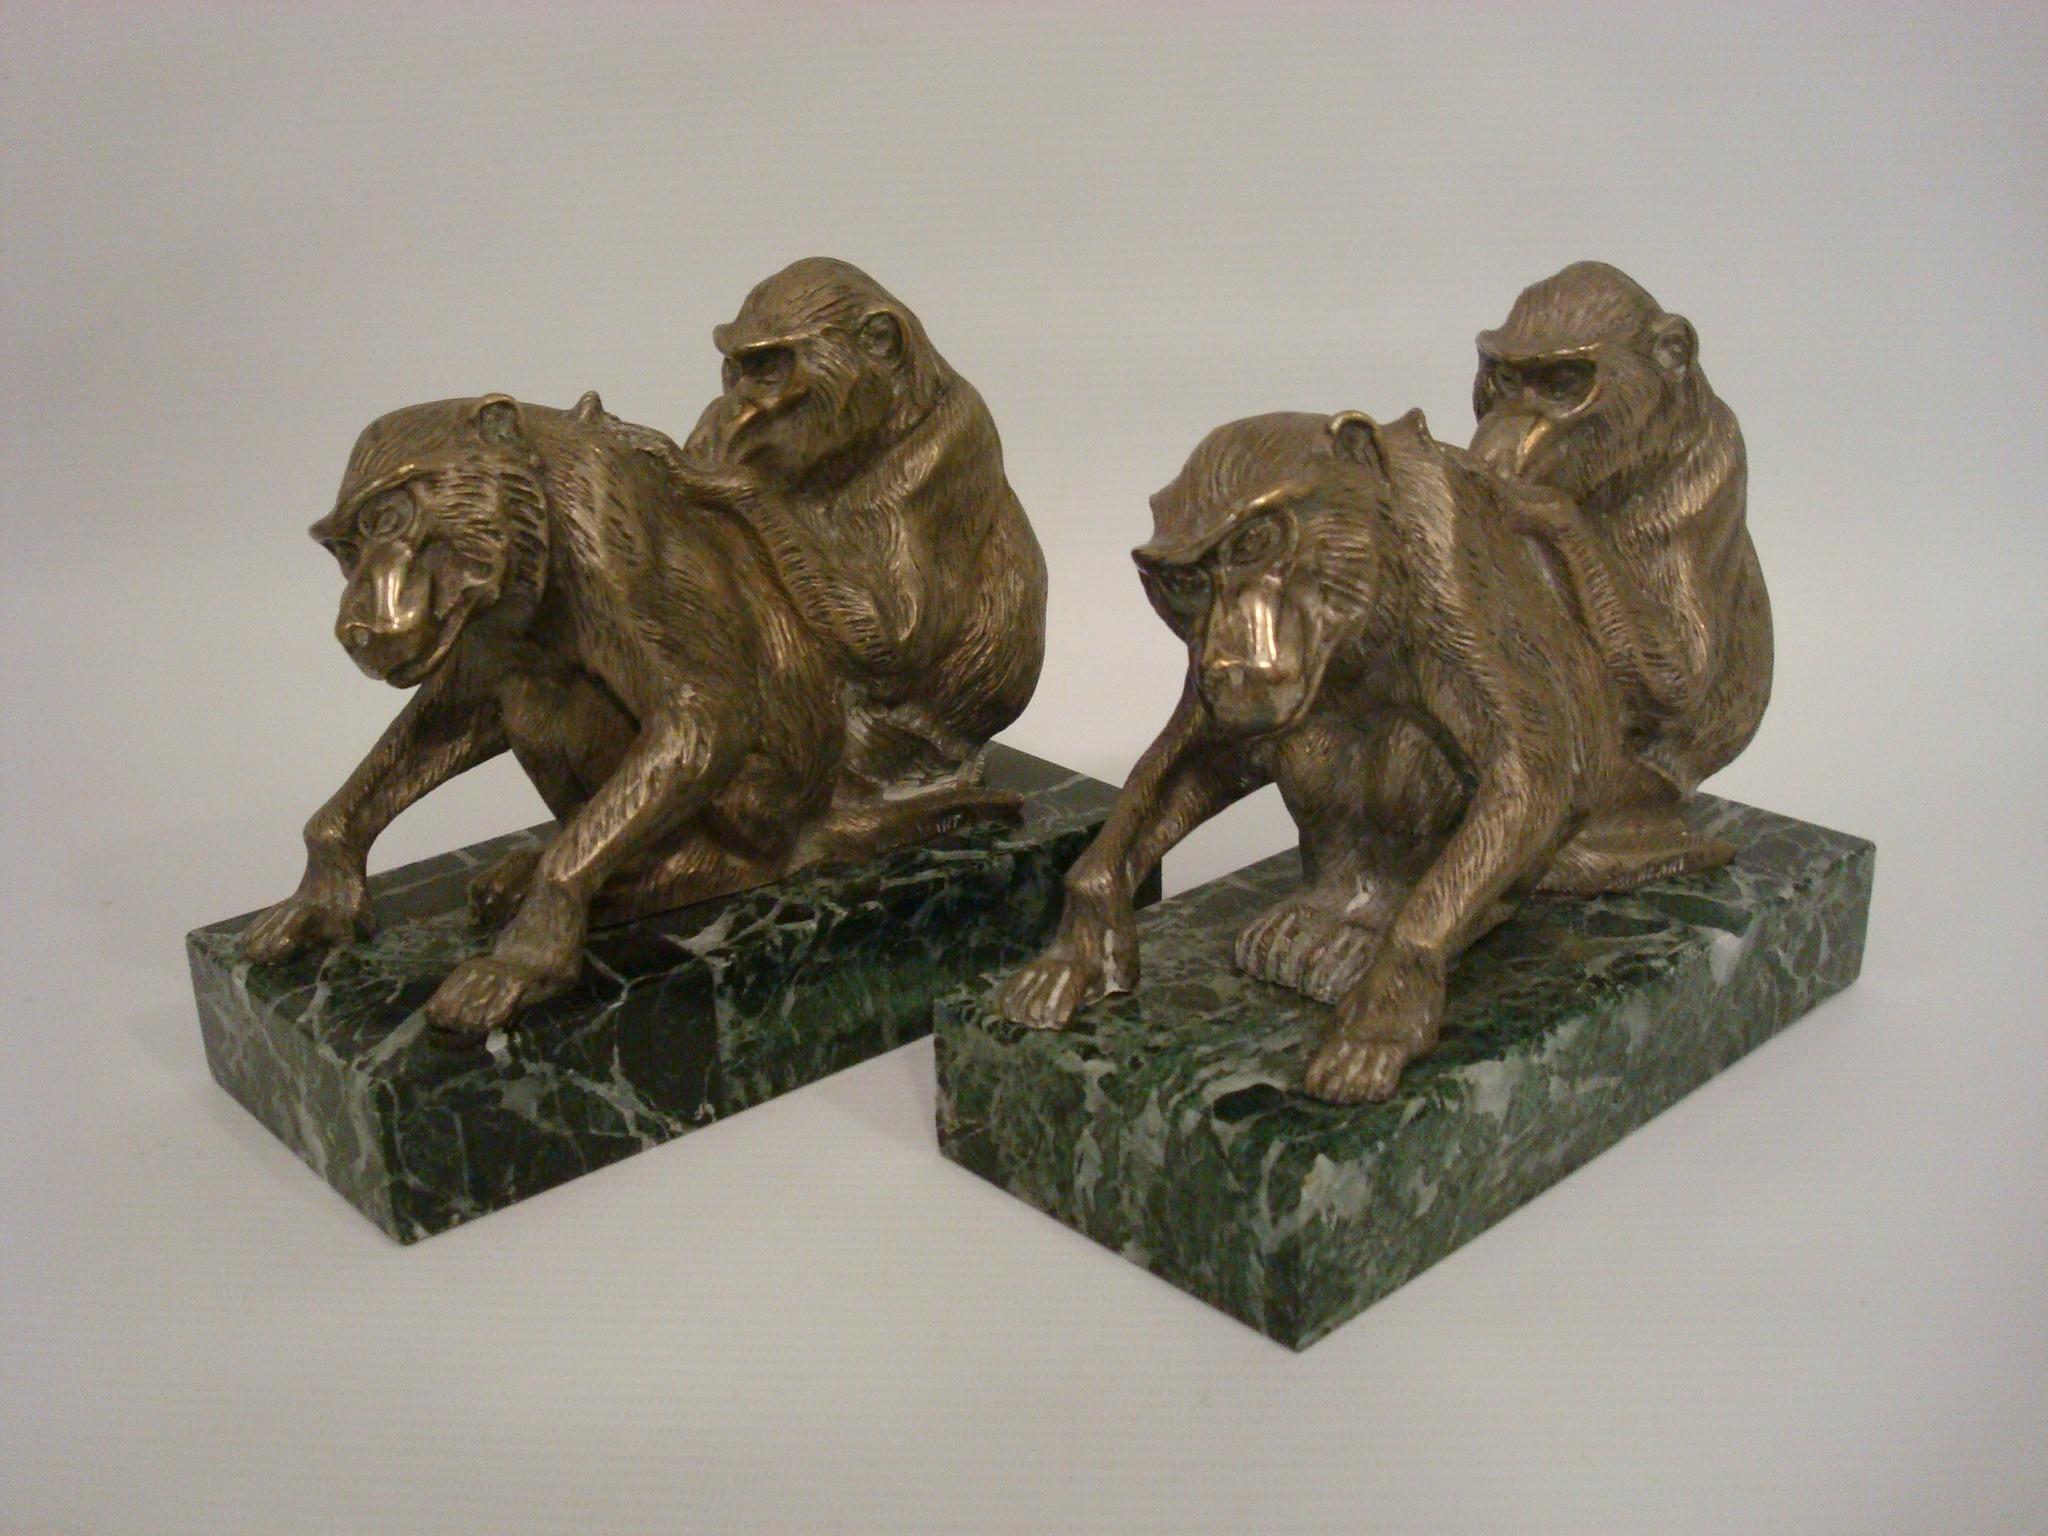 Very nice Art Deco bookends, pair of monkey’s figures. Mounted over green marble bases. Perfect to use for heavy books. Signed Bourcart, France, circa 1925. The monkeys look like Olive Baboon monkeys.